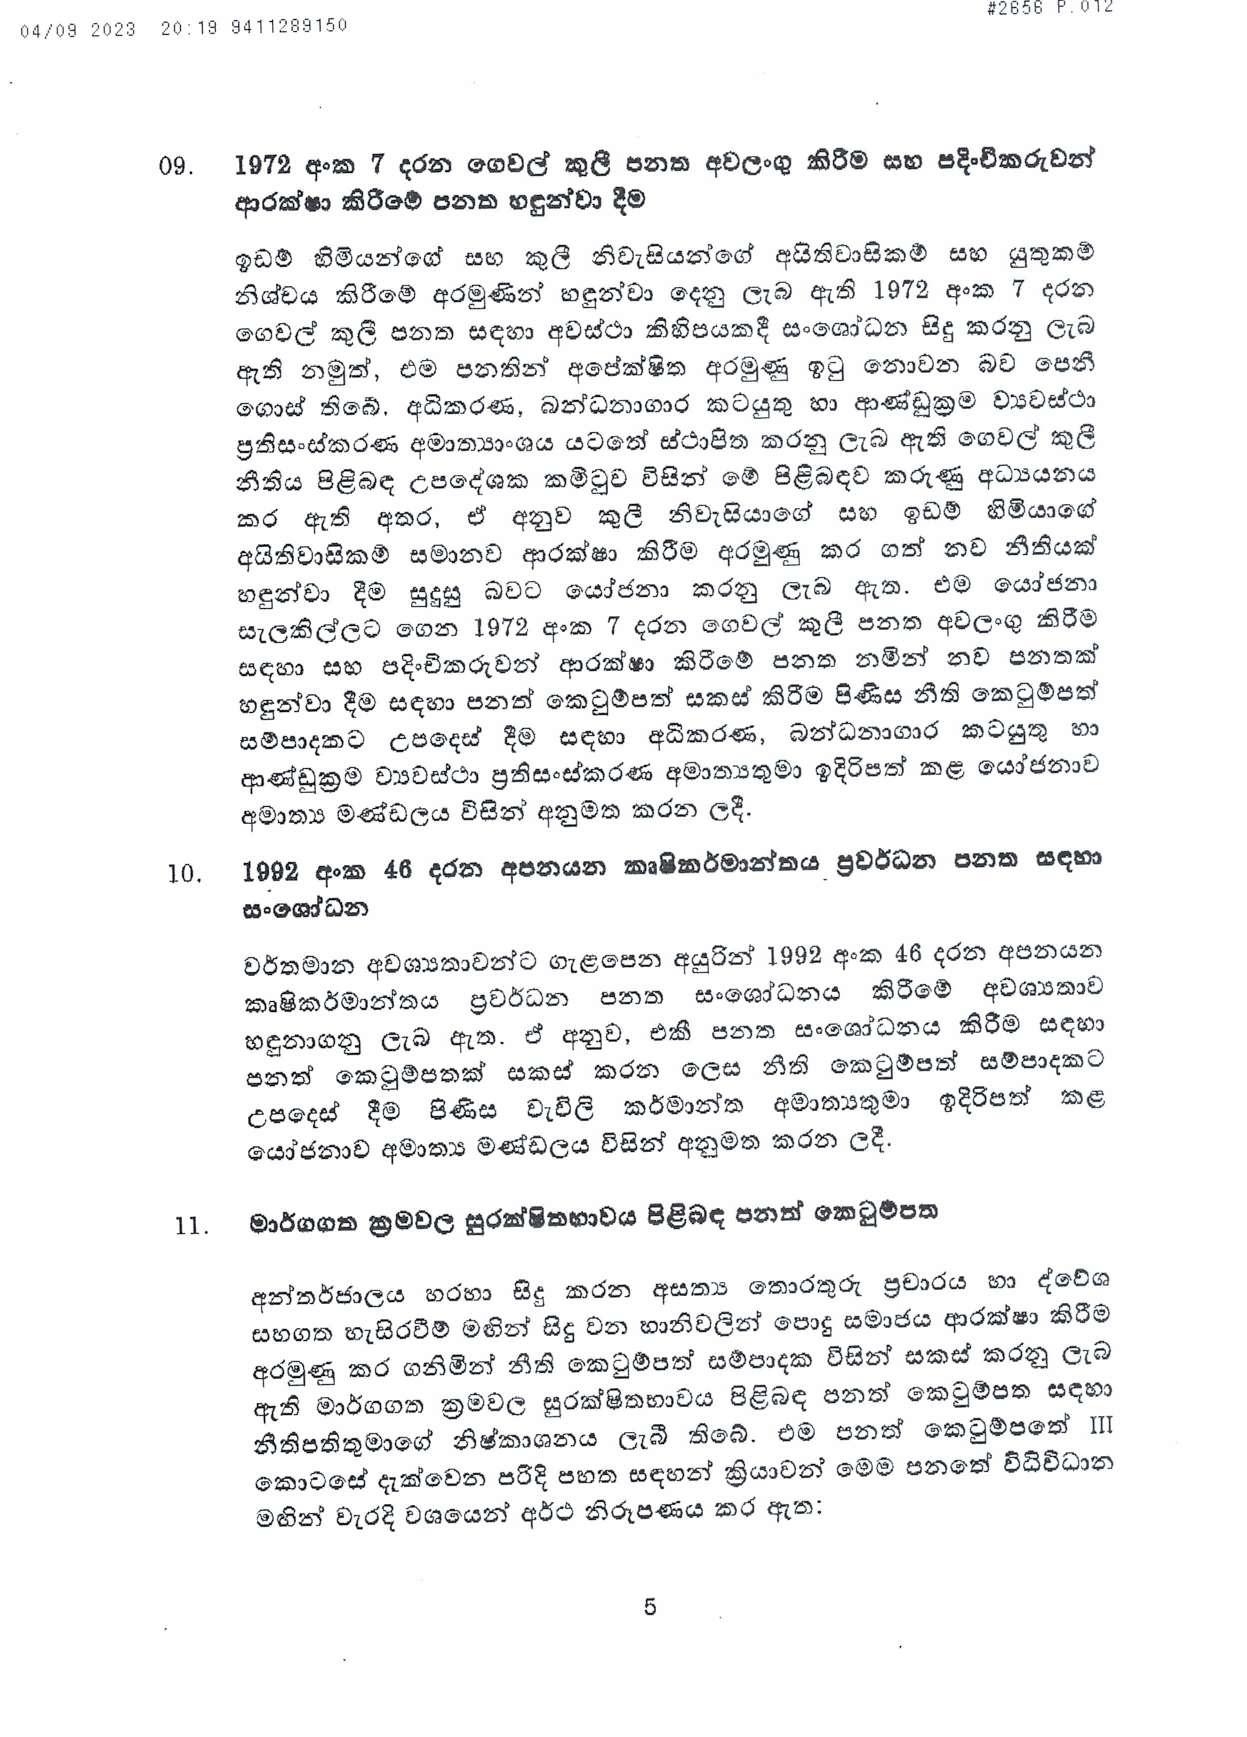 Cabinet Decision on 04.09.2023 page 005